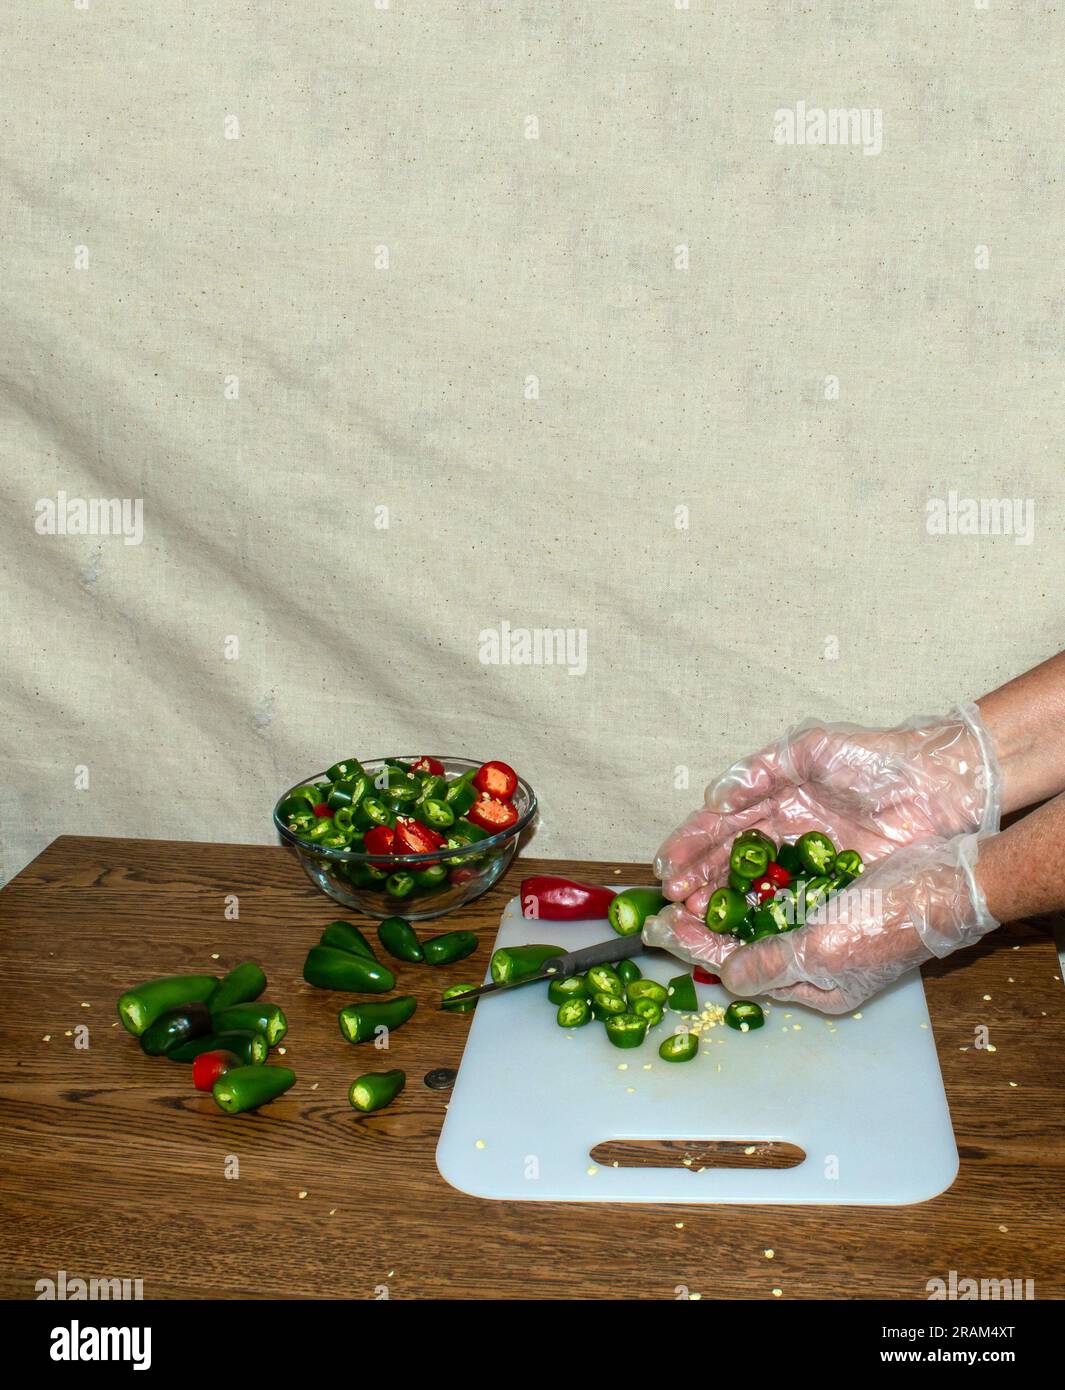 The jalapeno peppers have been washed and are being sliced. The kitchen workers wears gloves and holds a handful of the sliced vegetable. Stock Photo